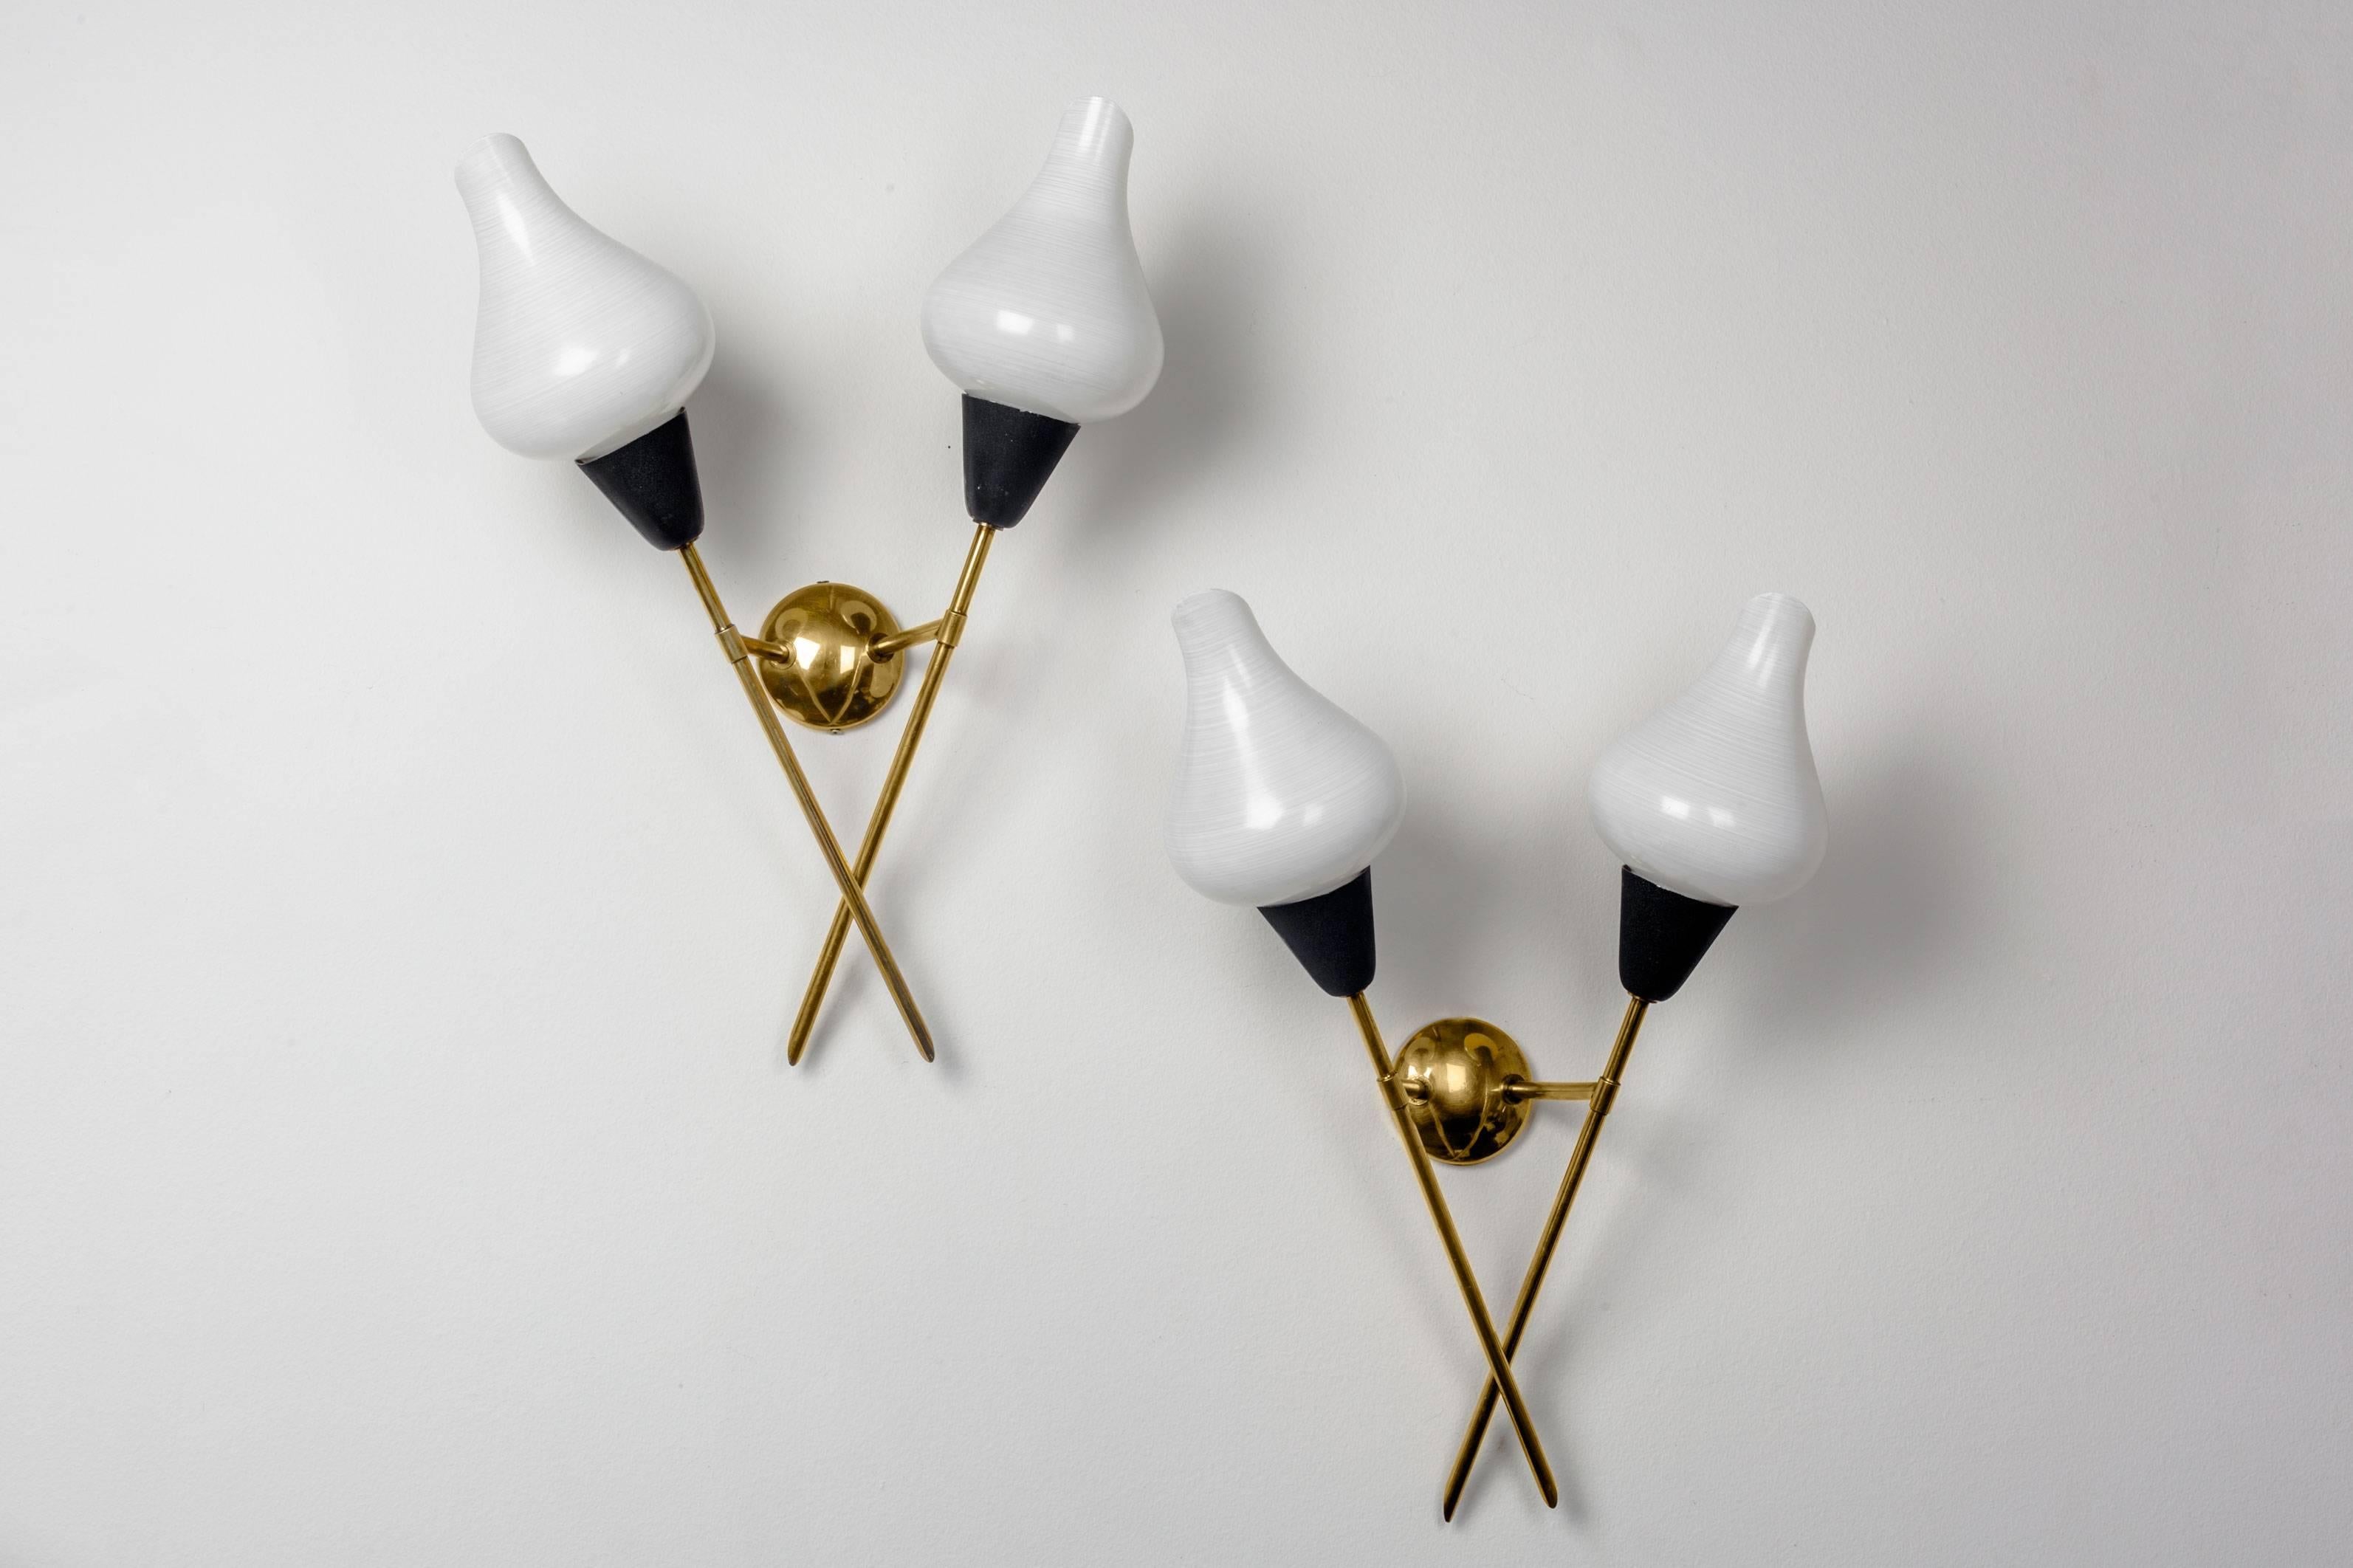 Mid-century French sconces by Arlus. Thin, crossed brass arms that end in opaline shades. These white milk glass shades have a subtile retticello effect, and a lovely shape reminiscent of a flower like the Calla Lily. Made in post-war France in the